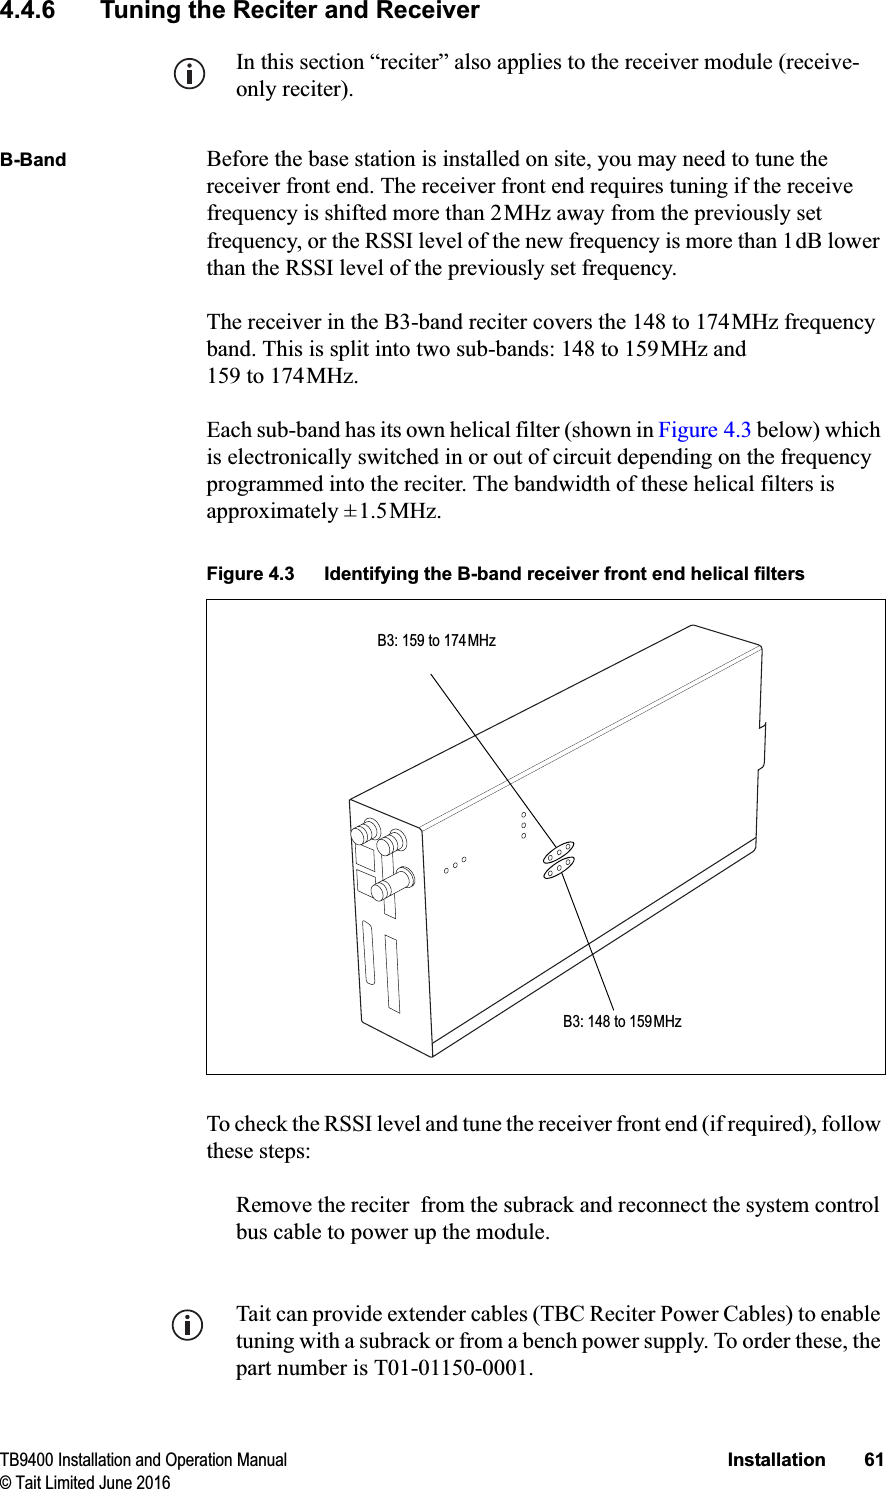 TB9400 Installation and Operation Manual Installation 61© Tait Limited June 20164.4.6 Tuning the Reciter and ReceiverIn this section “reciter” also applies to the receiver module (receive-only reciter).B-Band Before the base station is installed on site, you may need to tune the receiver front end. The receiver front end requires tuning if the receive frequency is shifted more than 2MHz away from the previously set frequency, or the RSSI level of the new frequency is more than 1dB lower than the RSSI level of the previously set frequency. The receiver in the B3-band reciter covers the 148 to 174MHz frequency band. This is split into two sub-bands: 148 to 159MHz and 159 to 174MHz. Each sub-band has its own helical filter (shown in Figure 4.3 below) which is electronically switched in or out of circuit depending on the frequency programmed into the reciter. The bandwidth of these helical filters is approximately ±1.5MHz. To check the RSSI level and tune the receiver front end (if required), follow these steps:Remove the reciter  from the subrack and reconnect the system control bus cable to power up the module. Tait can provide extender cables (TBC Reciter Power Cables) to enable tuning with a subrack or from a bench power supply. To order these, the part number is T01-01150-0001.Figure 4.3 Identifying the B-band receiver front end helical filtersB3: 148 to 159MHzB3: 159 to 174MHz